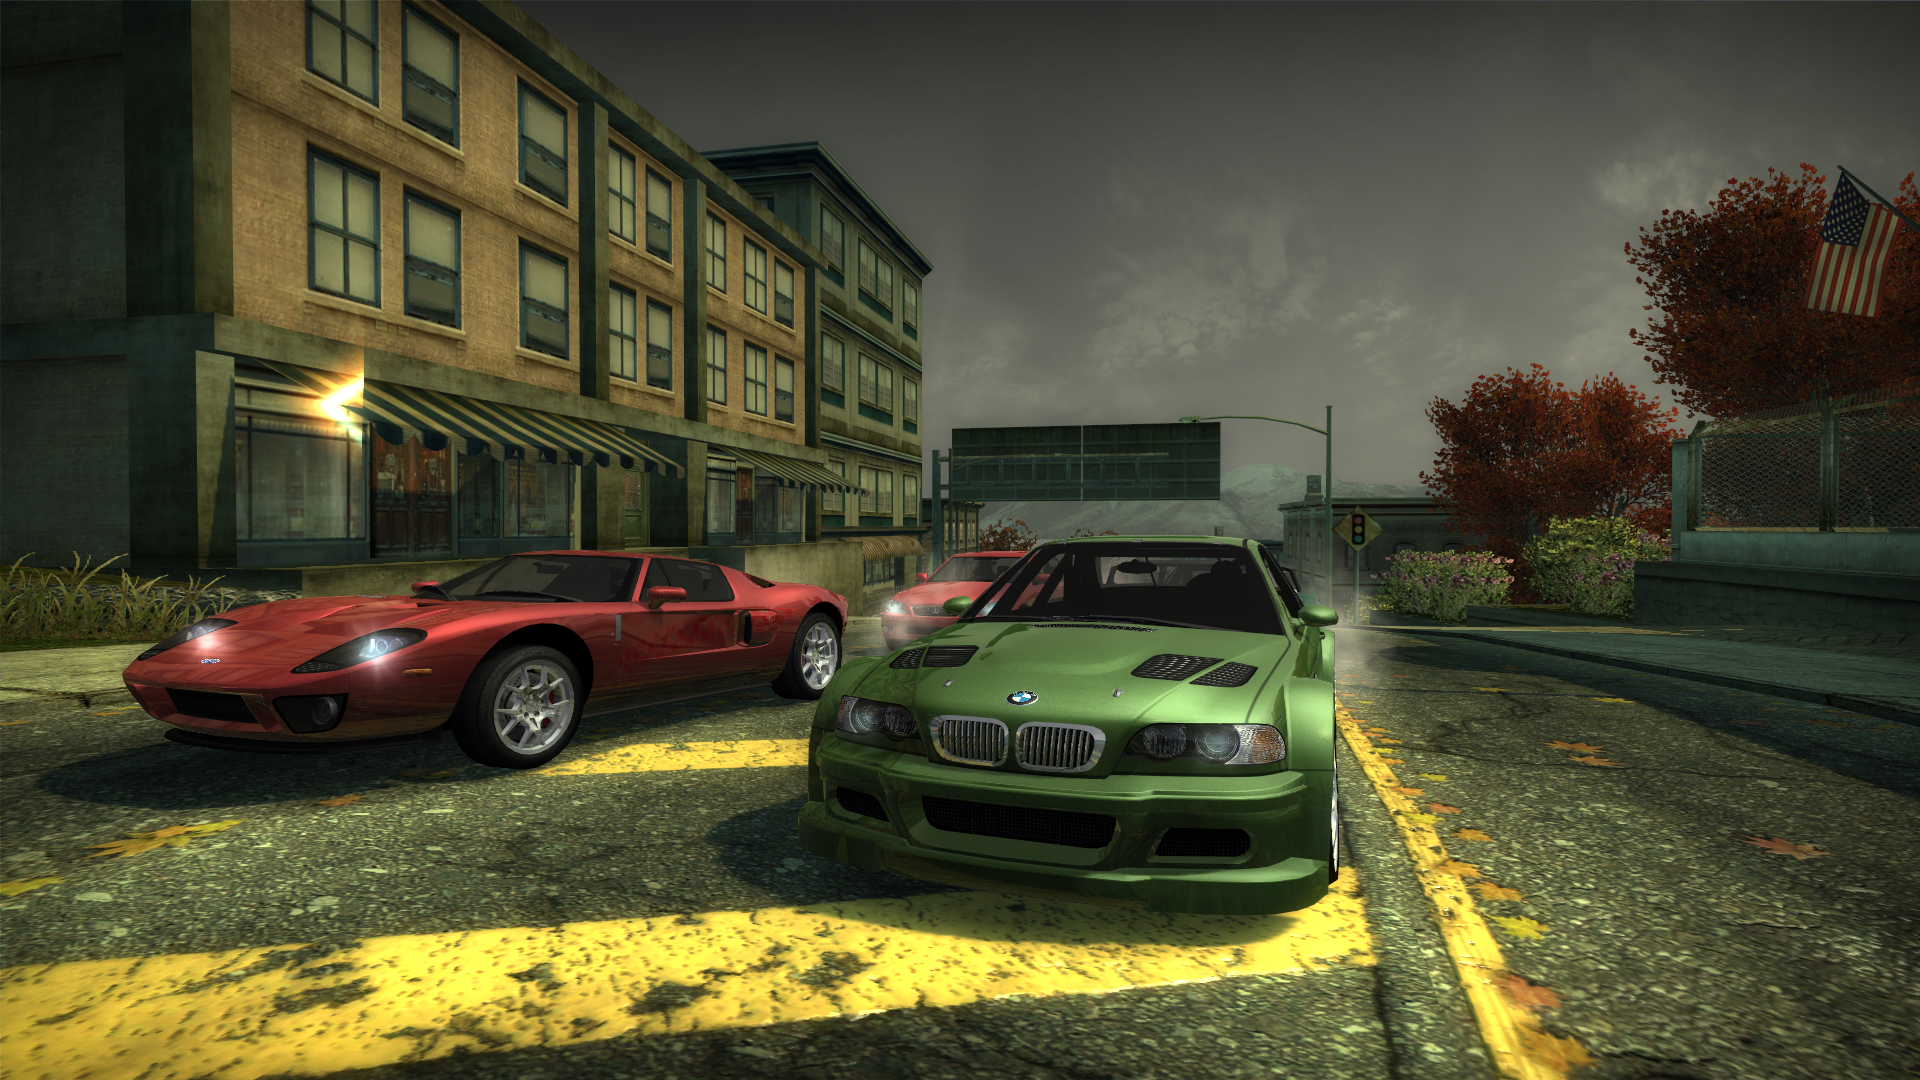 Nfs города. NFS most wanted 2005. Рокпорт город NFS. NFS most wanted улучшенная версия. NFS most wanted Remastered.